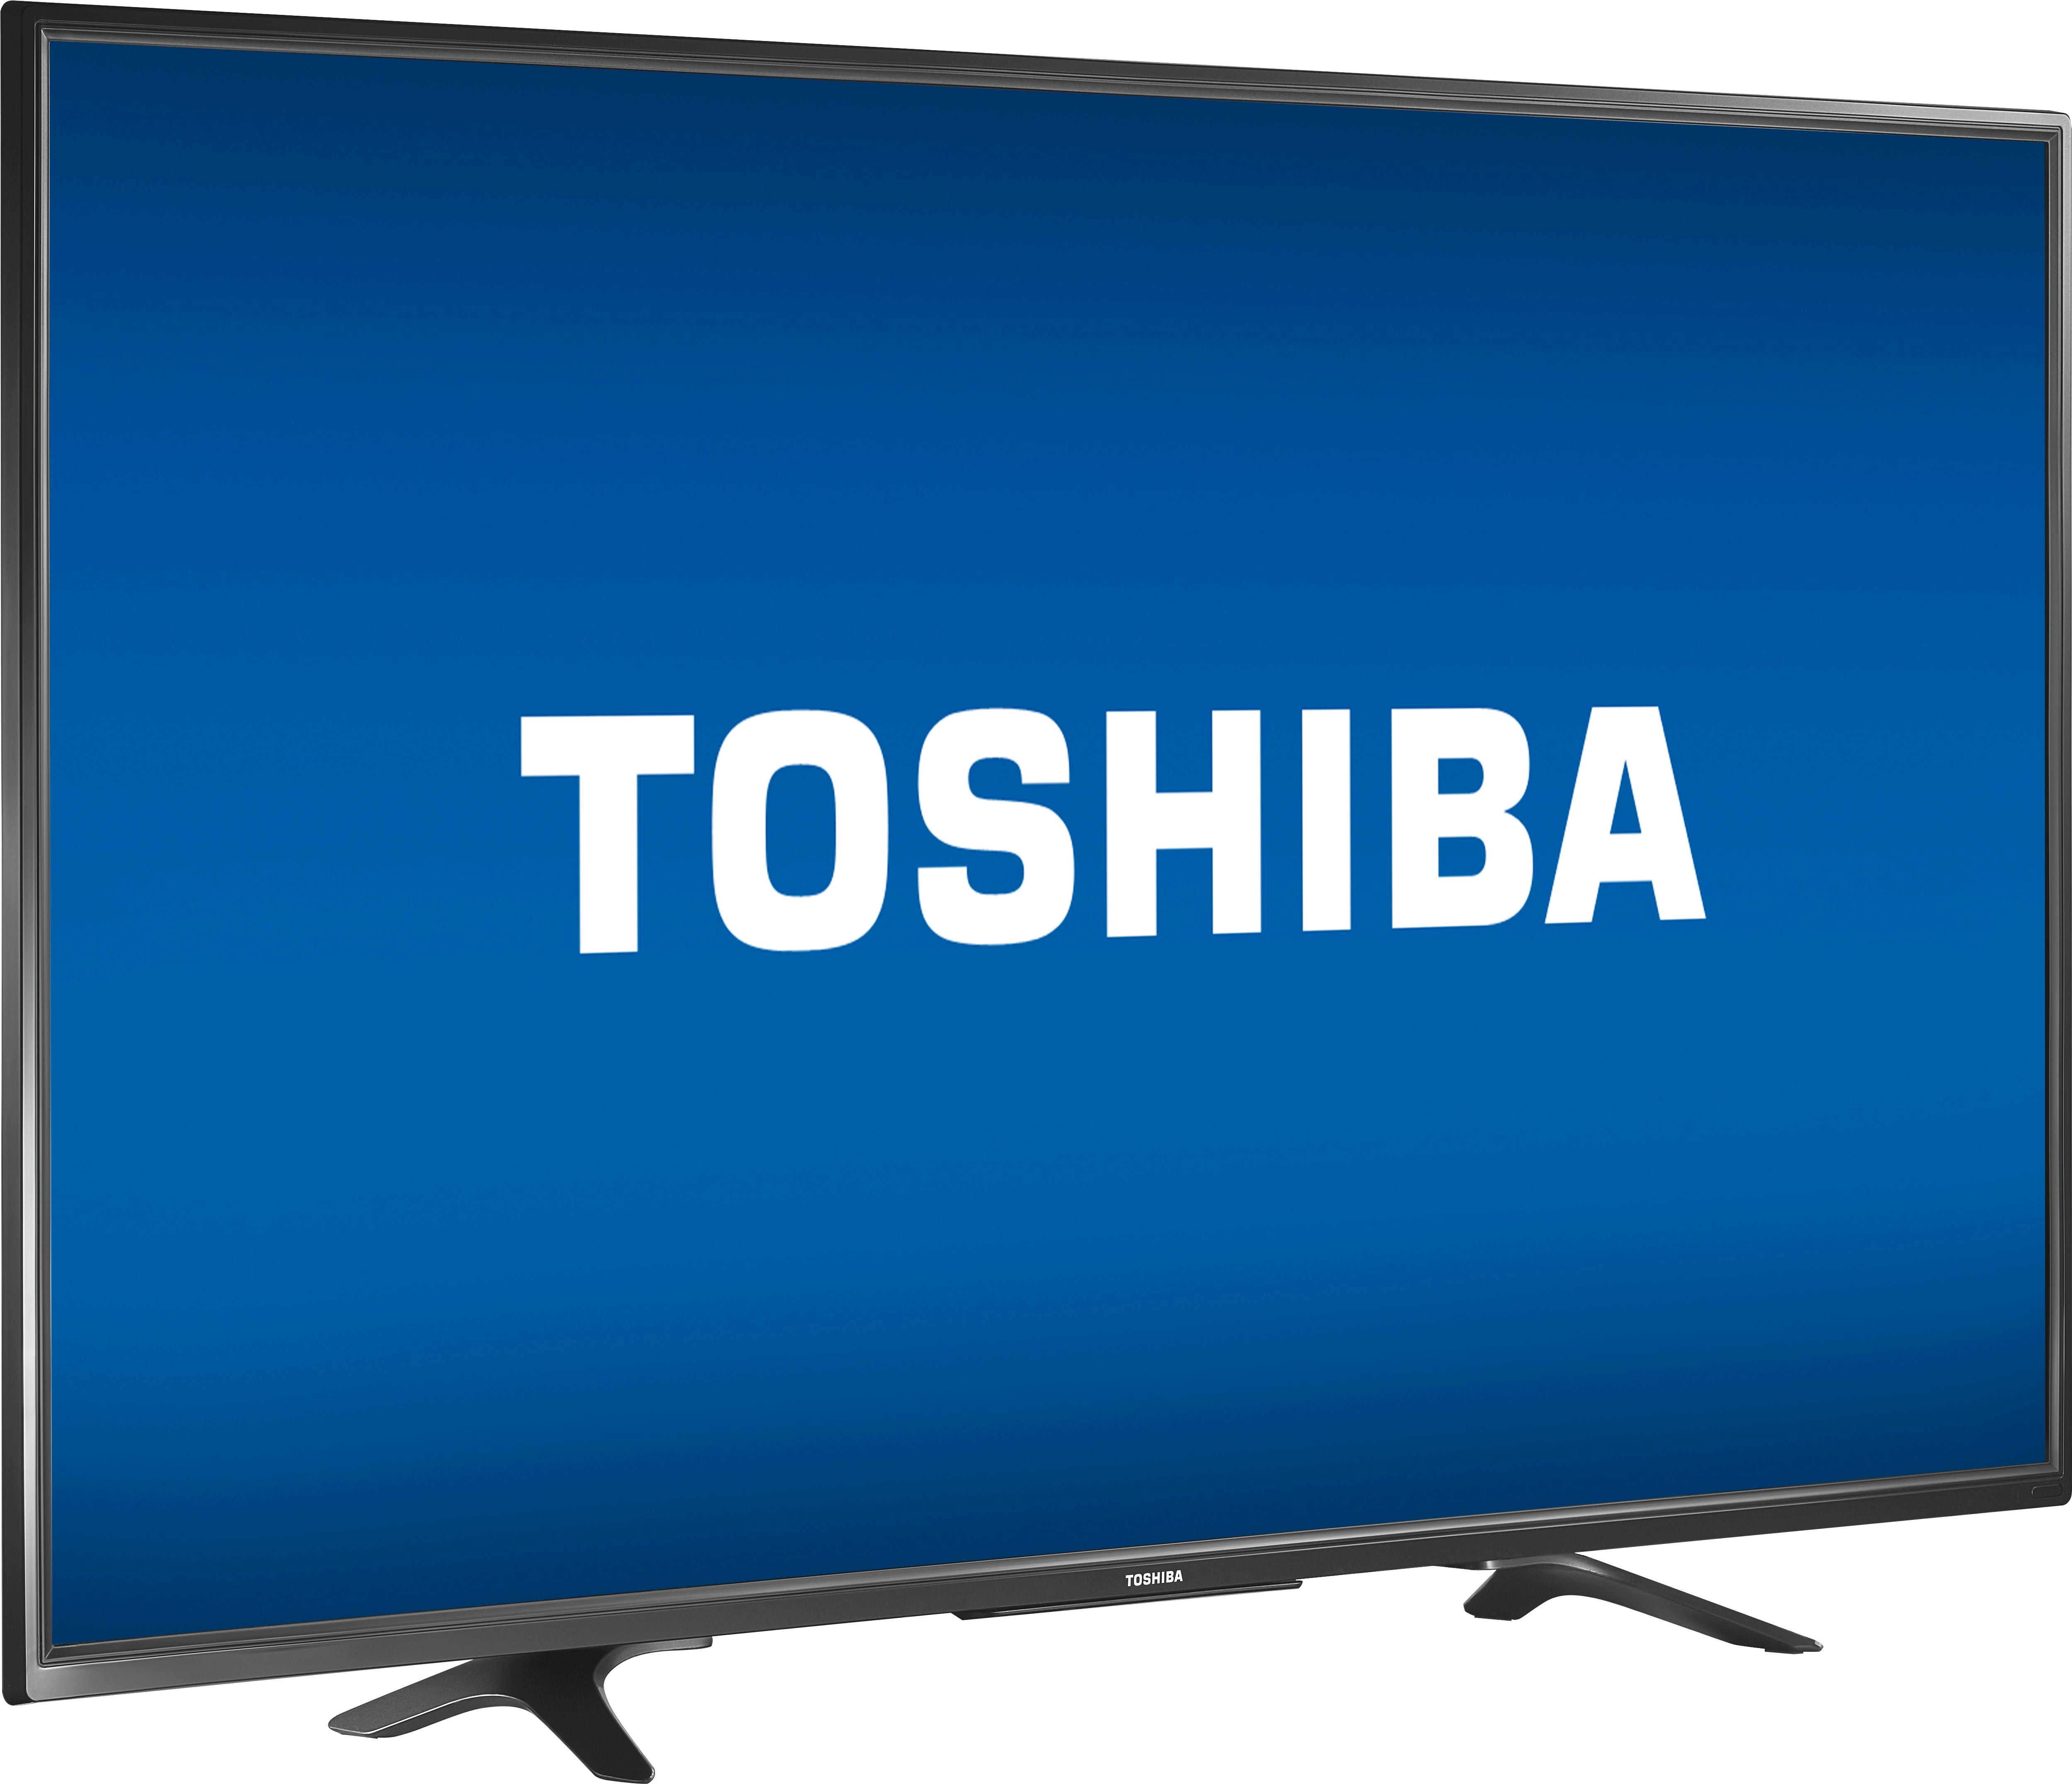 Buy: Toshiba Class 2160p with Chromecast Built-in 4K UHD TV with HDR 55L711U18